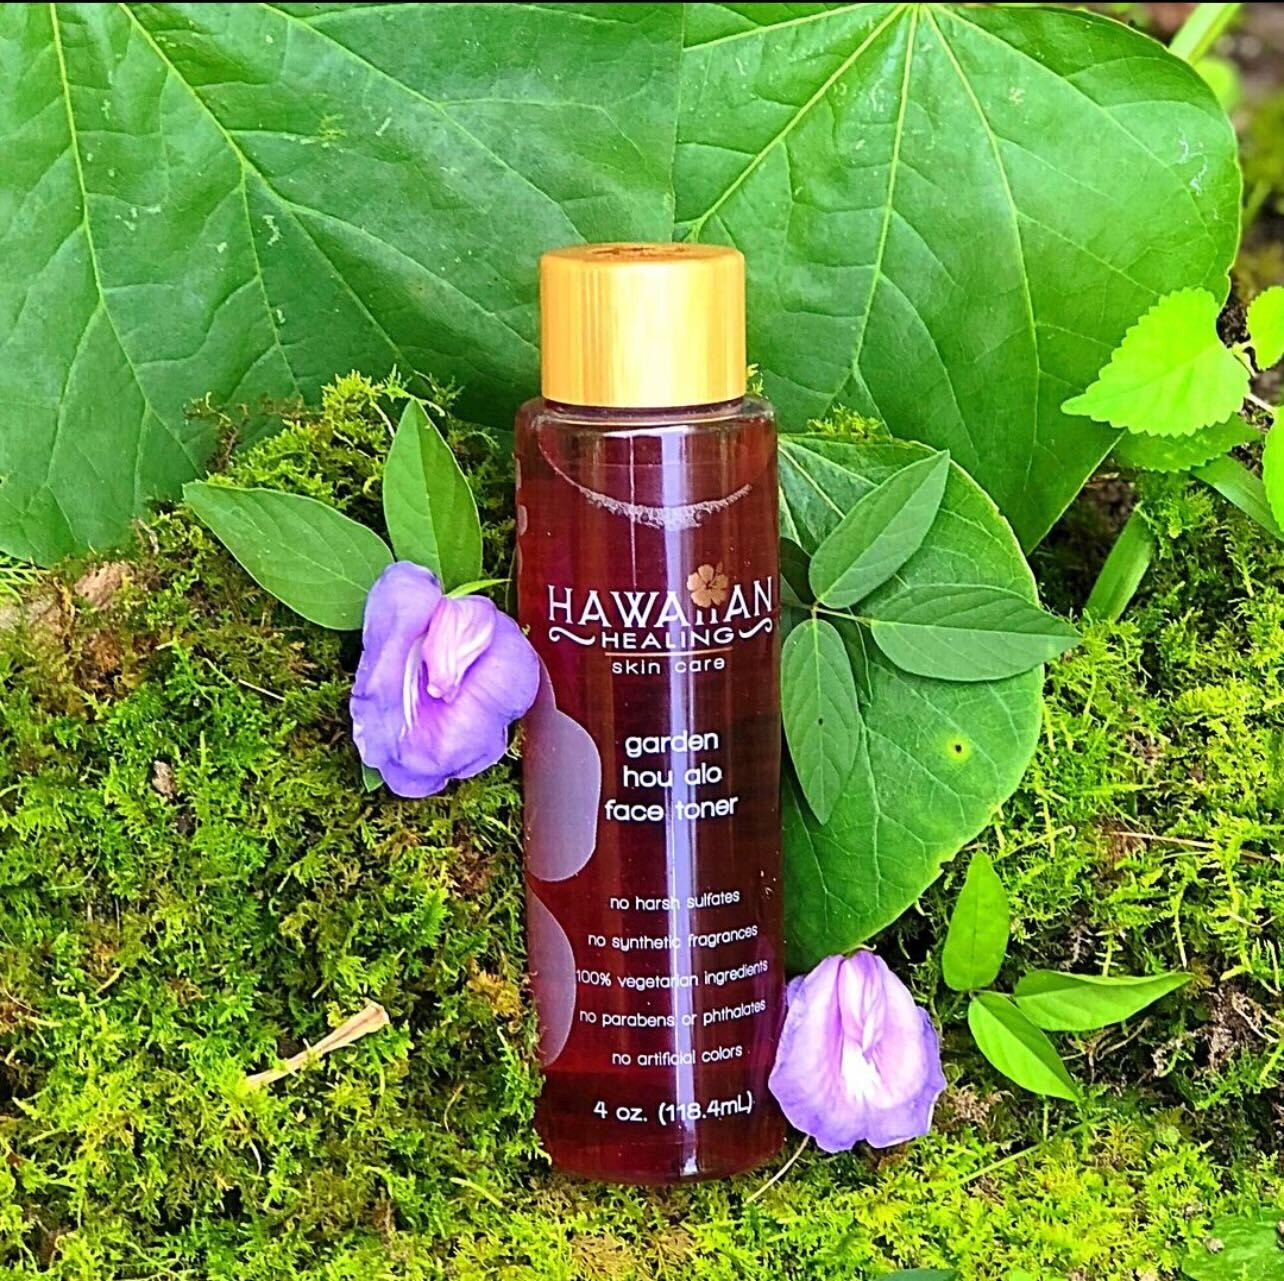 Hawaiian Healing Skin Care, Garden Hou Alo Face Toner with Rose and Witch  Hazel Hydrosol, 100% Organic, Vegan, and Hydrating